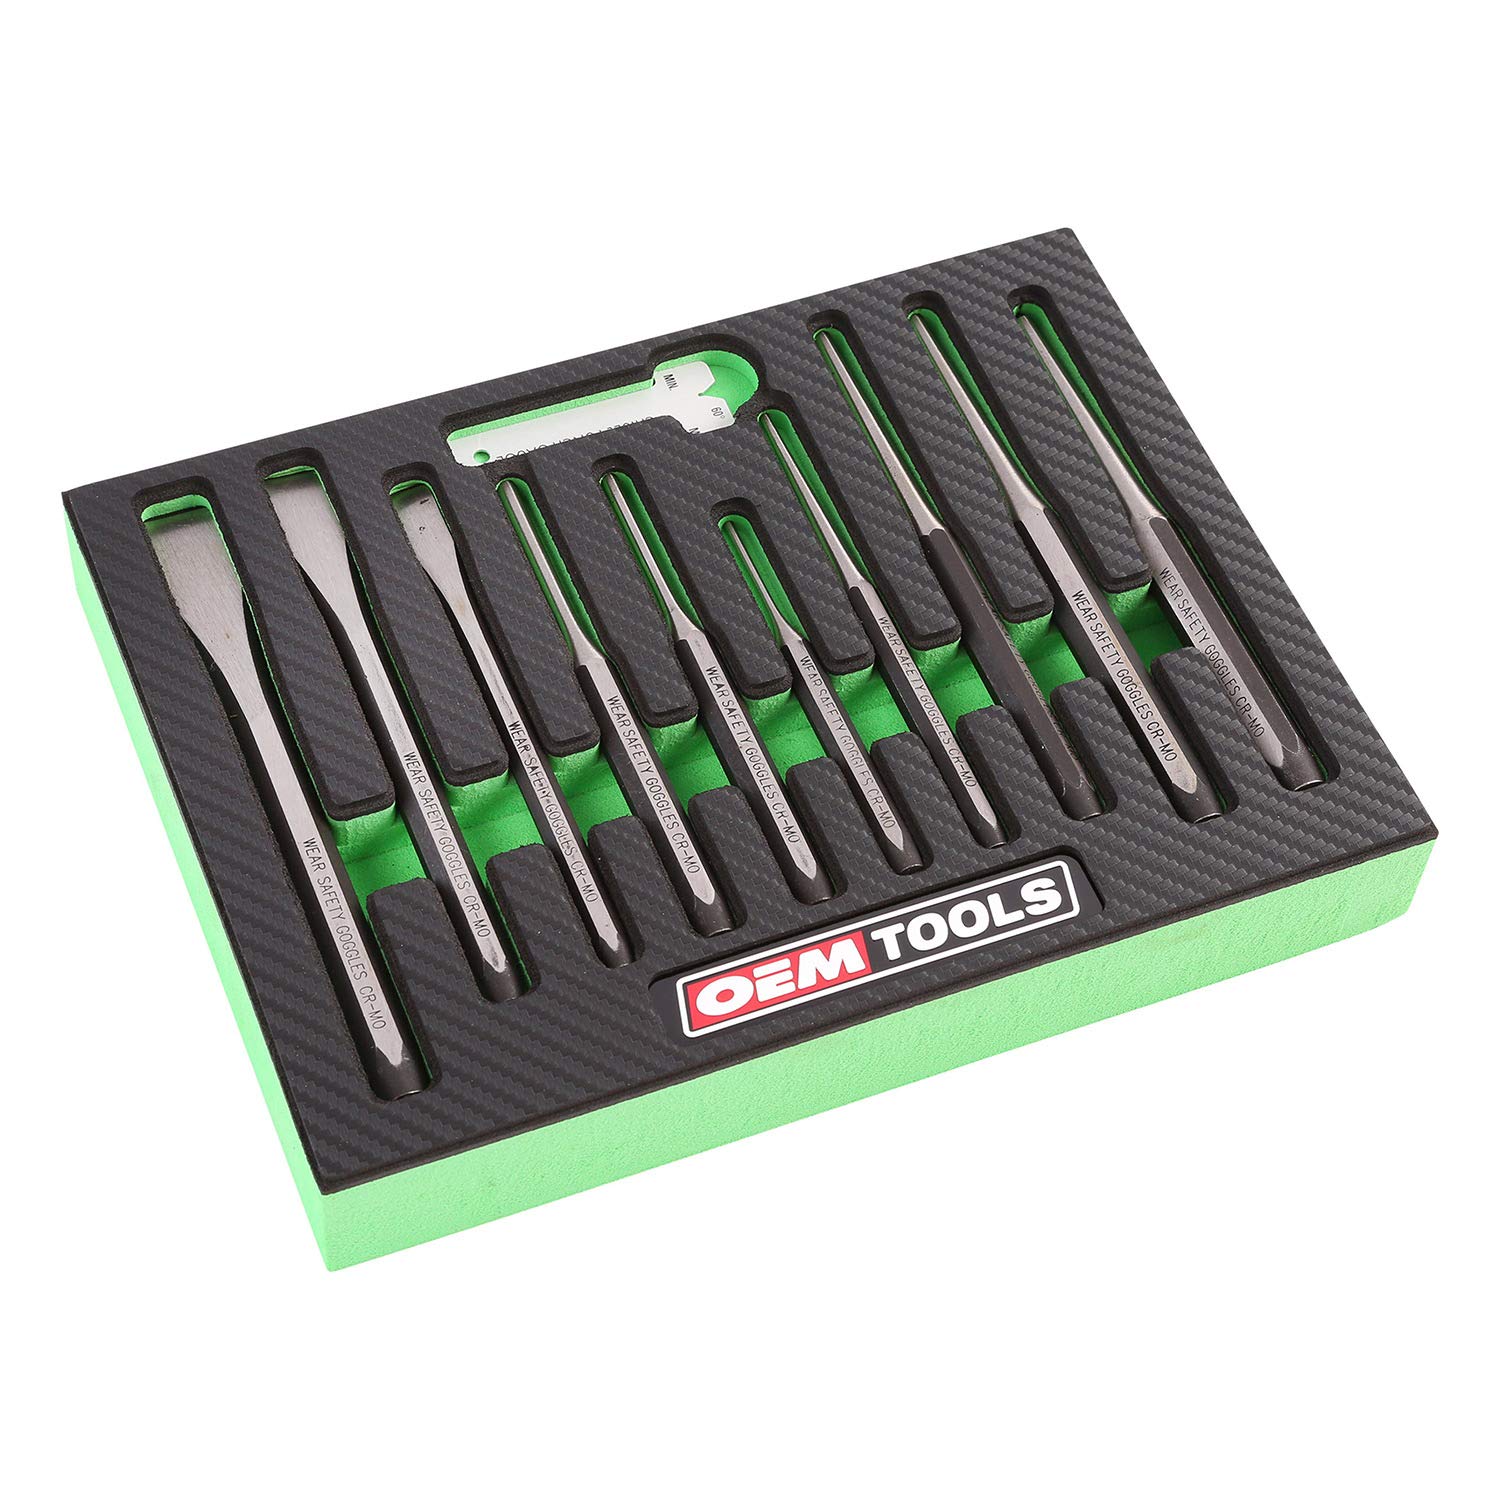 OEMTOOLS 23996 Punch and Chisel Set, 11 Piece, Cut, Shape, and